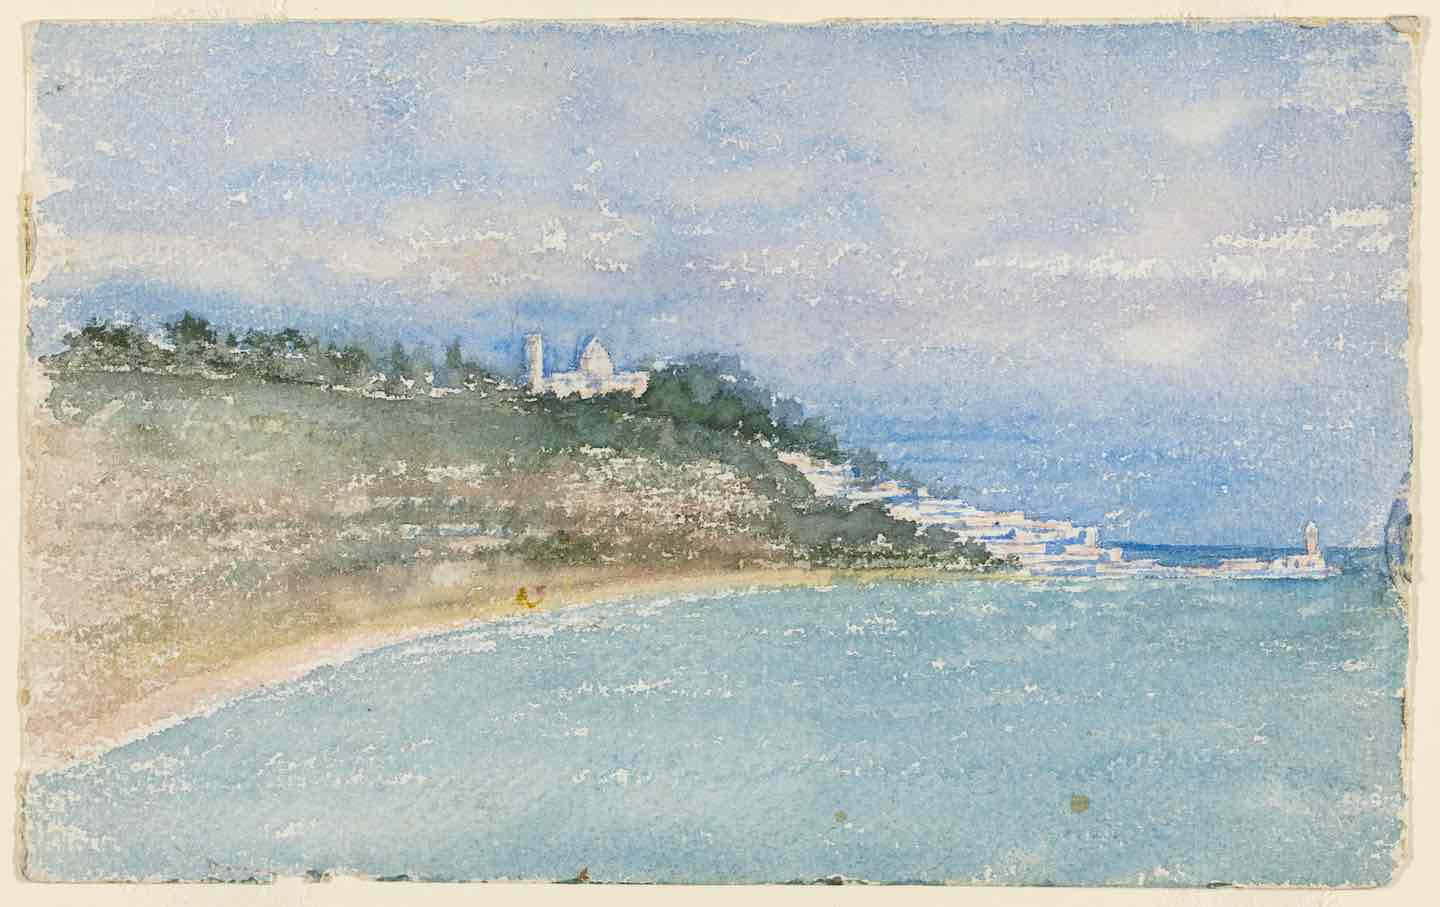 Point West of Algiers, North Africa, travel sketch, 1896.